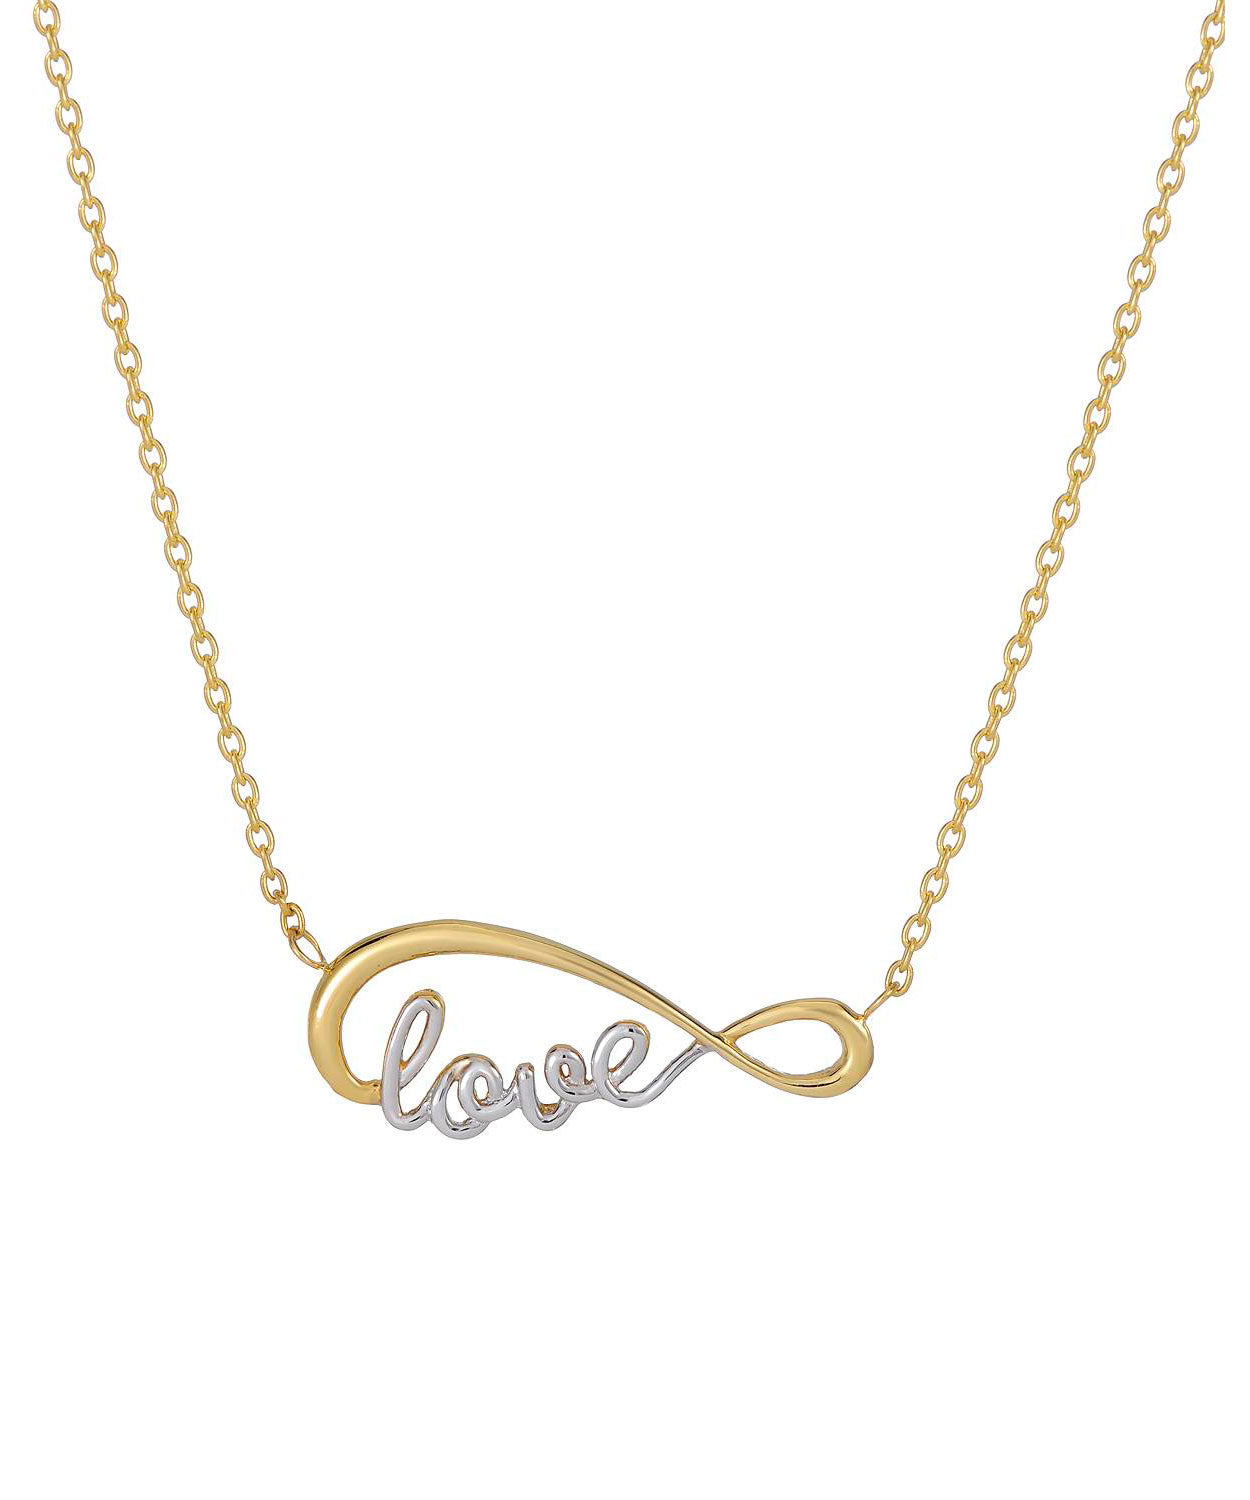 Love Story Collection 14k Two-Tone Gold "Infinity Love" Necklace - Made in Italy View 1